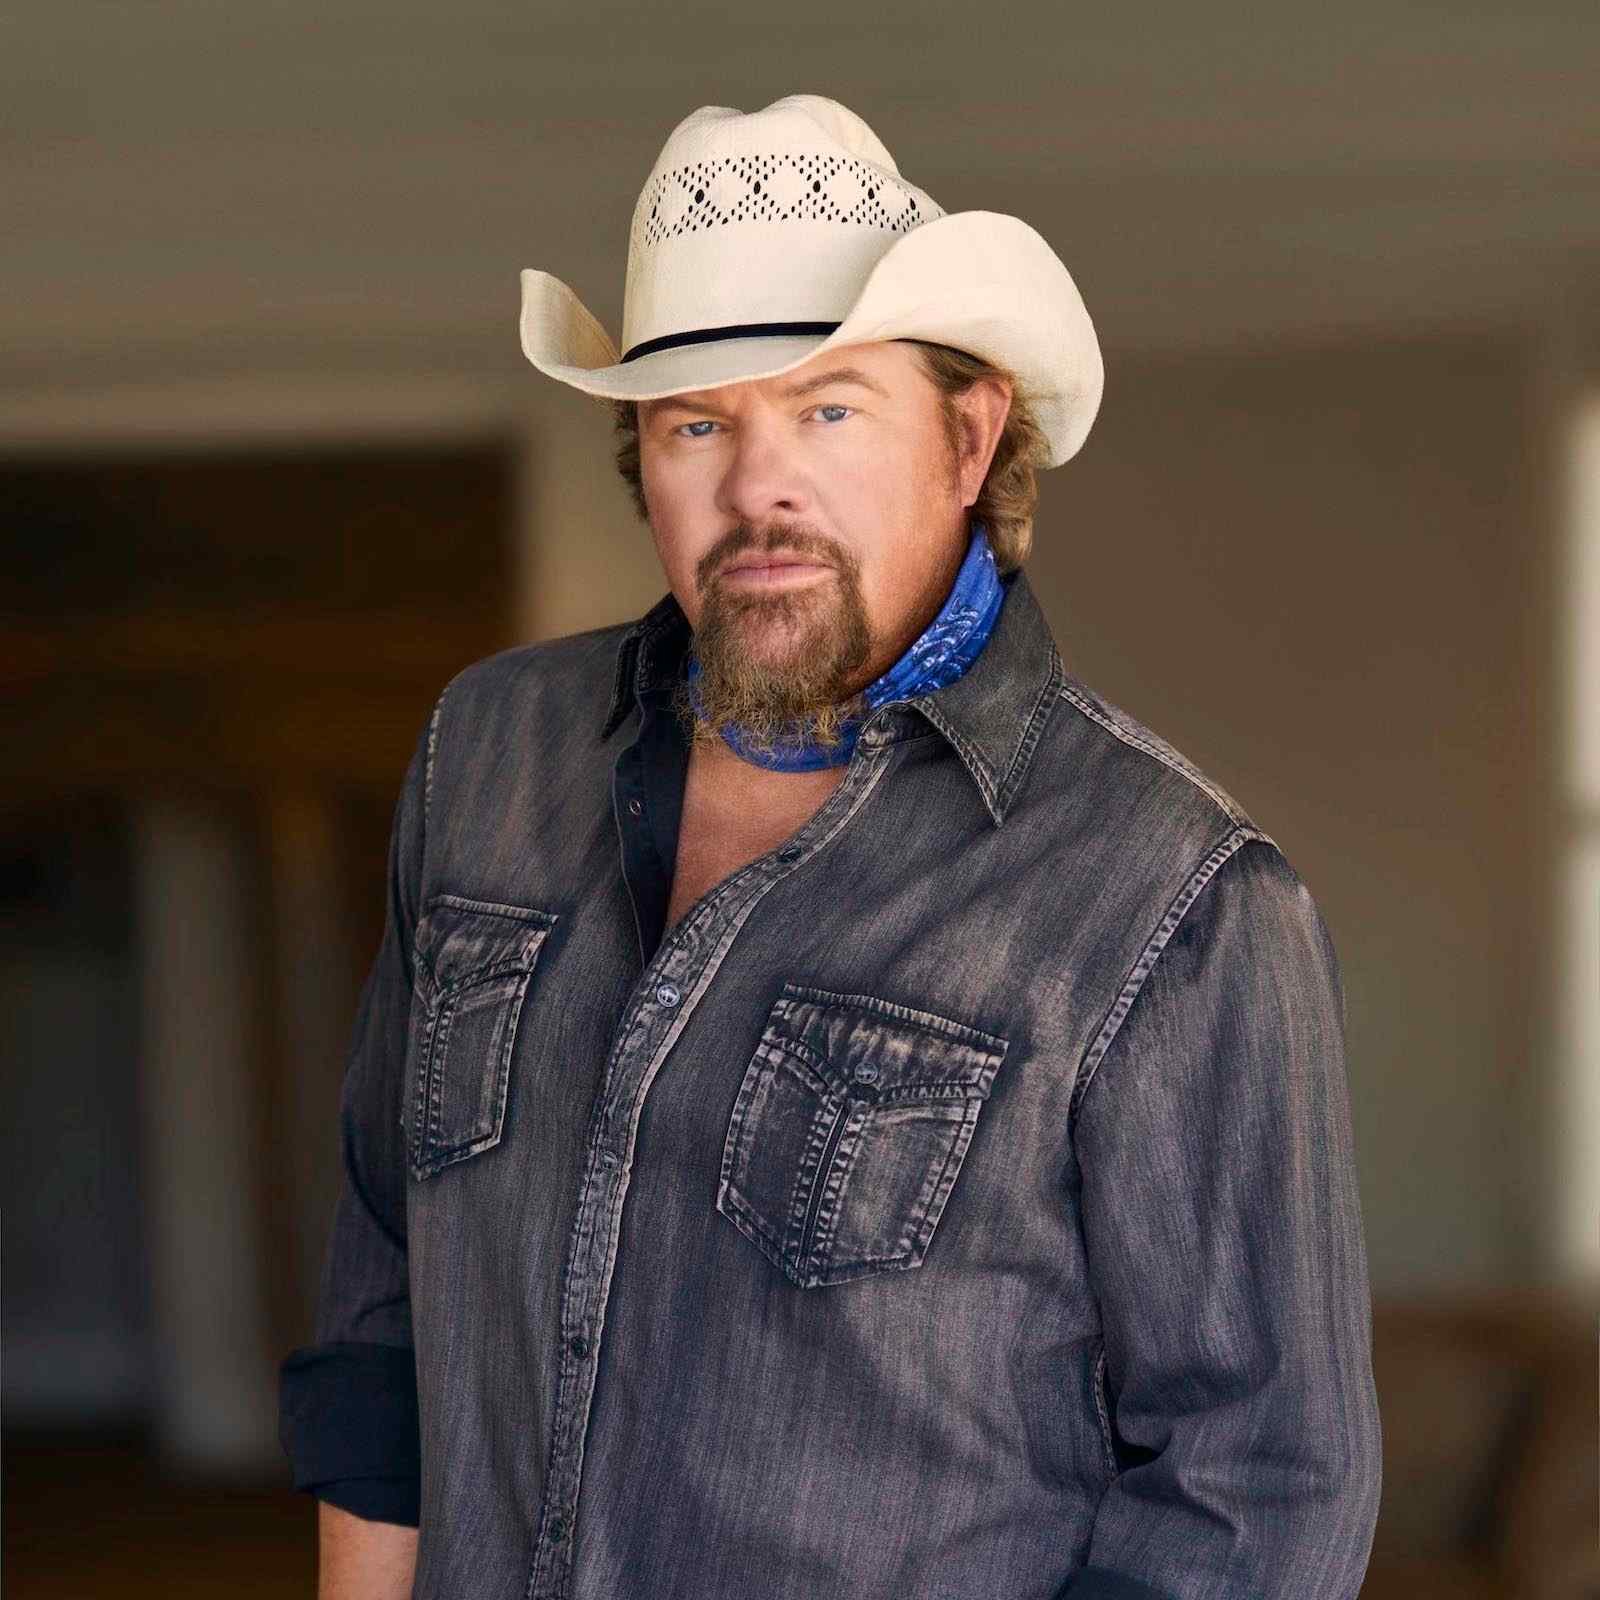 Toby Keith to be Honored with BMI Icon Award At the 2022 BMI Country Awards